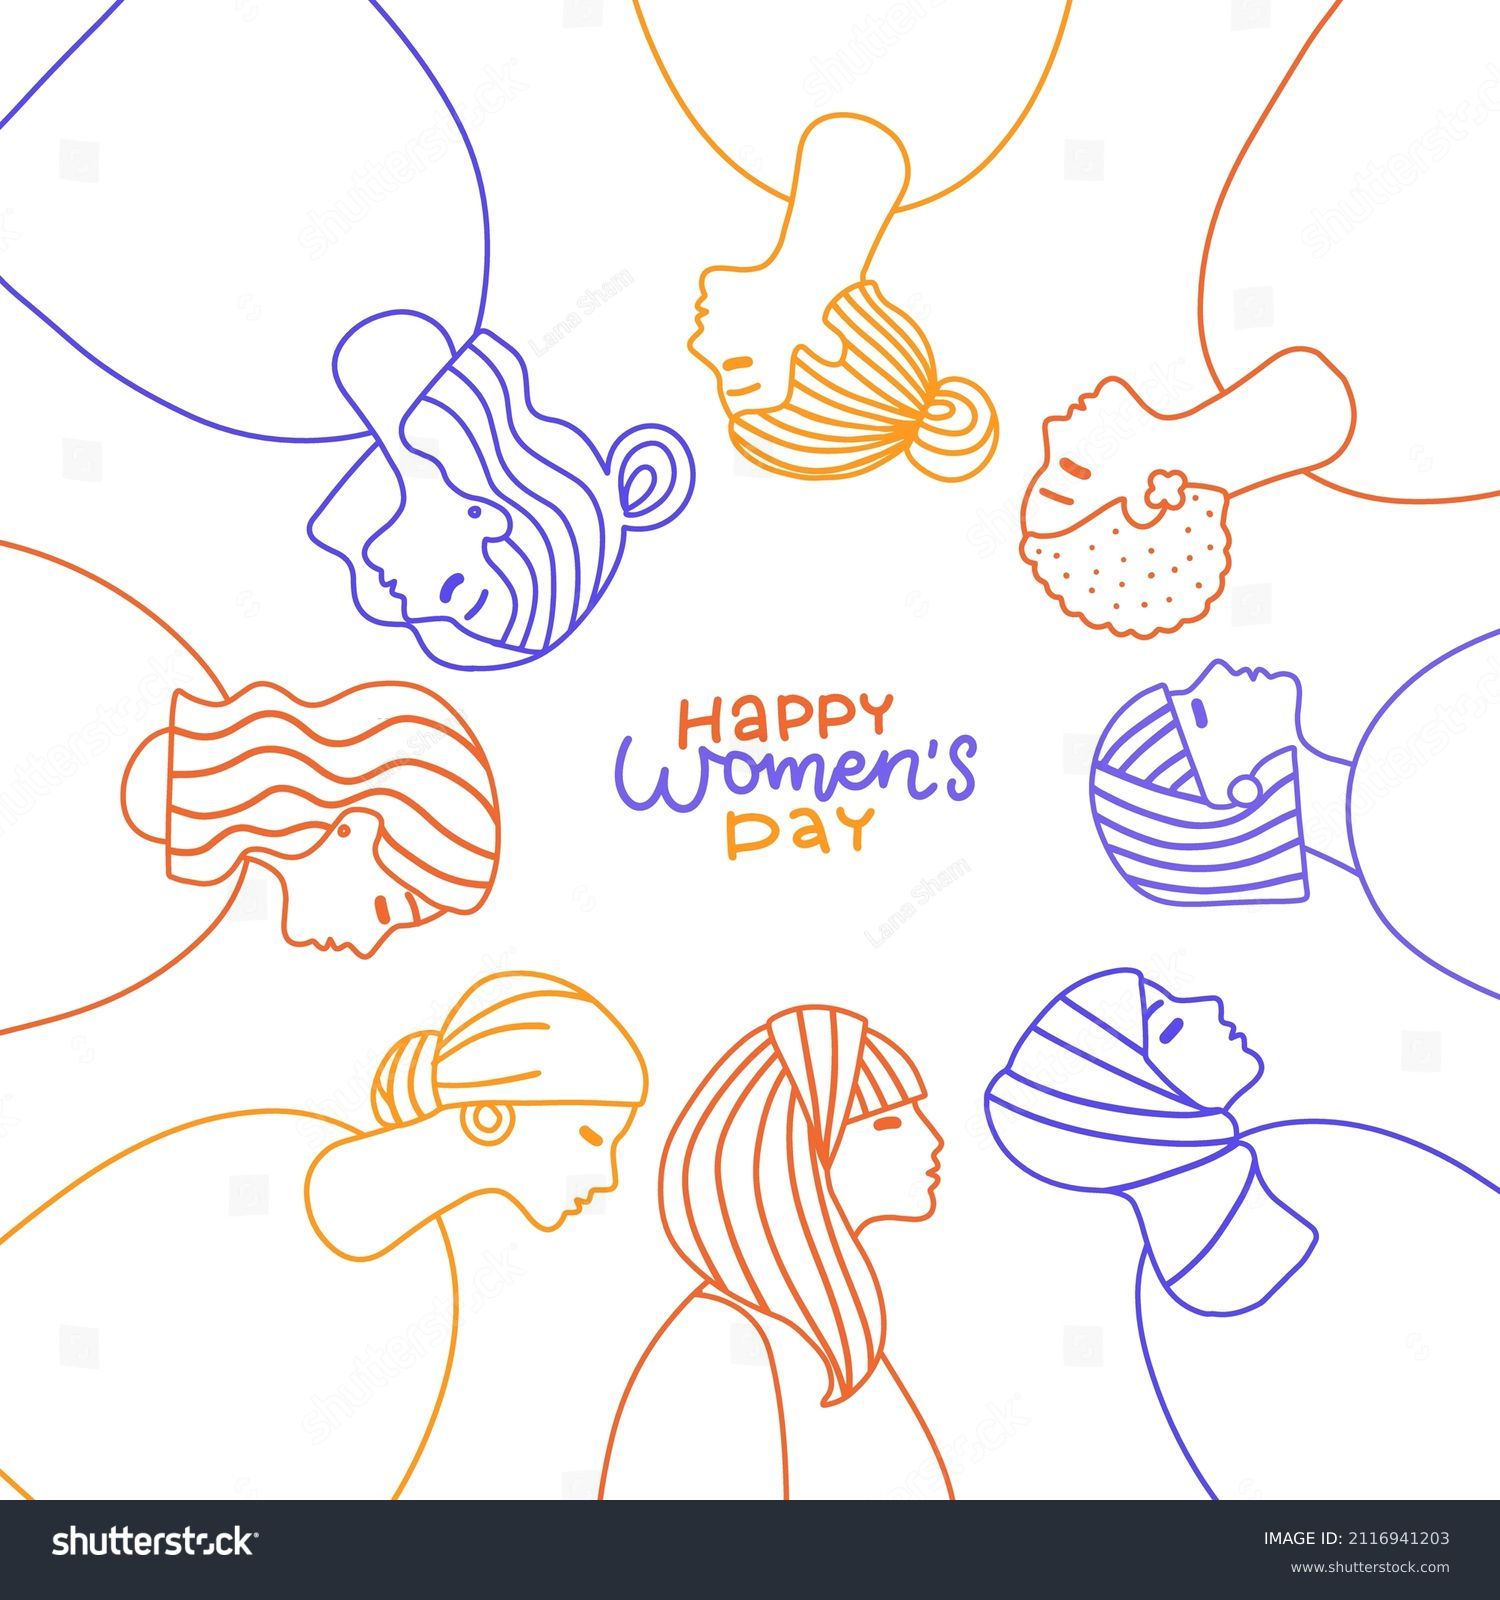 International Women's Day greeting card. Abstract different women portraits in one line style . Women empowerment. Vector linear doodle hand drawn illustration with lettering greeting text. #2116941203